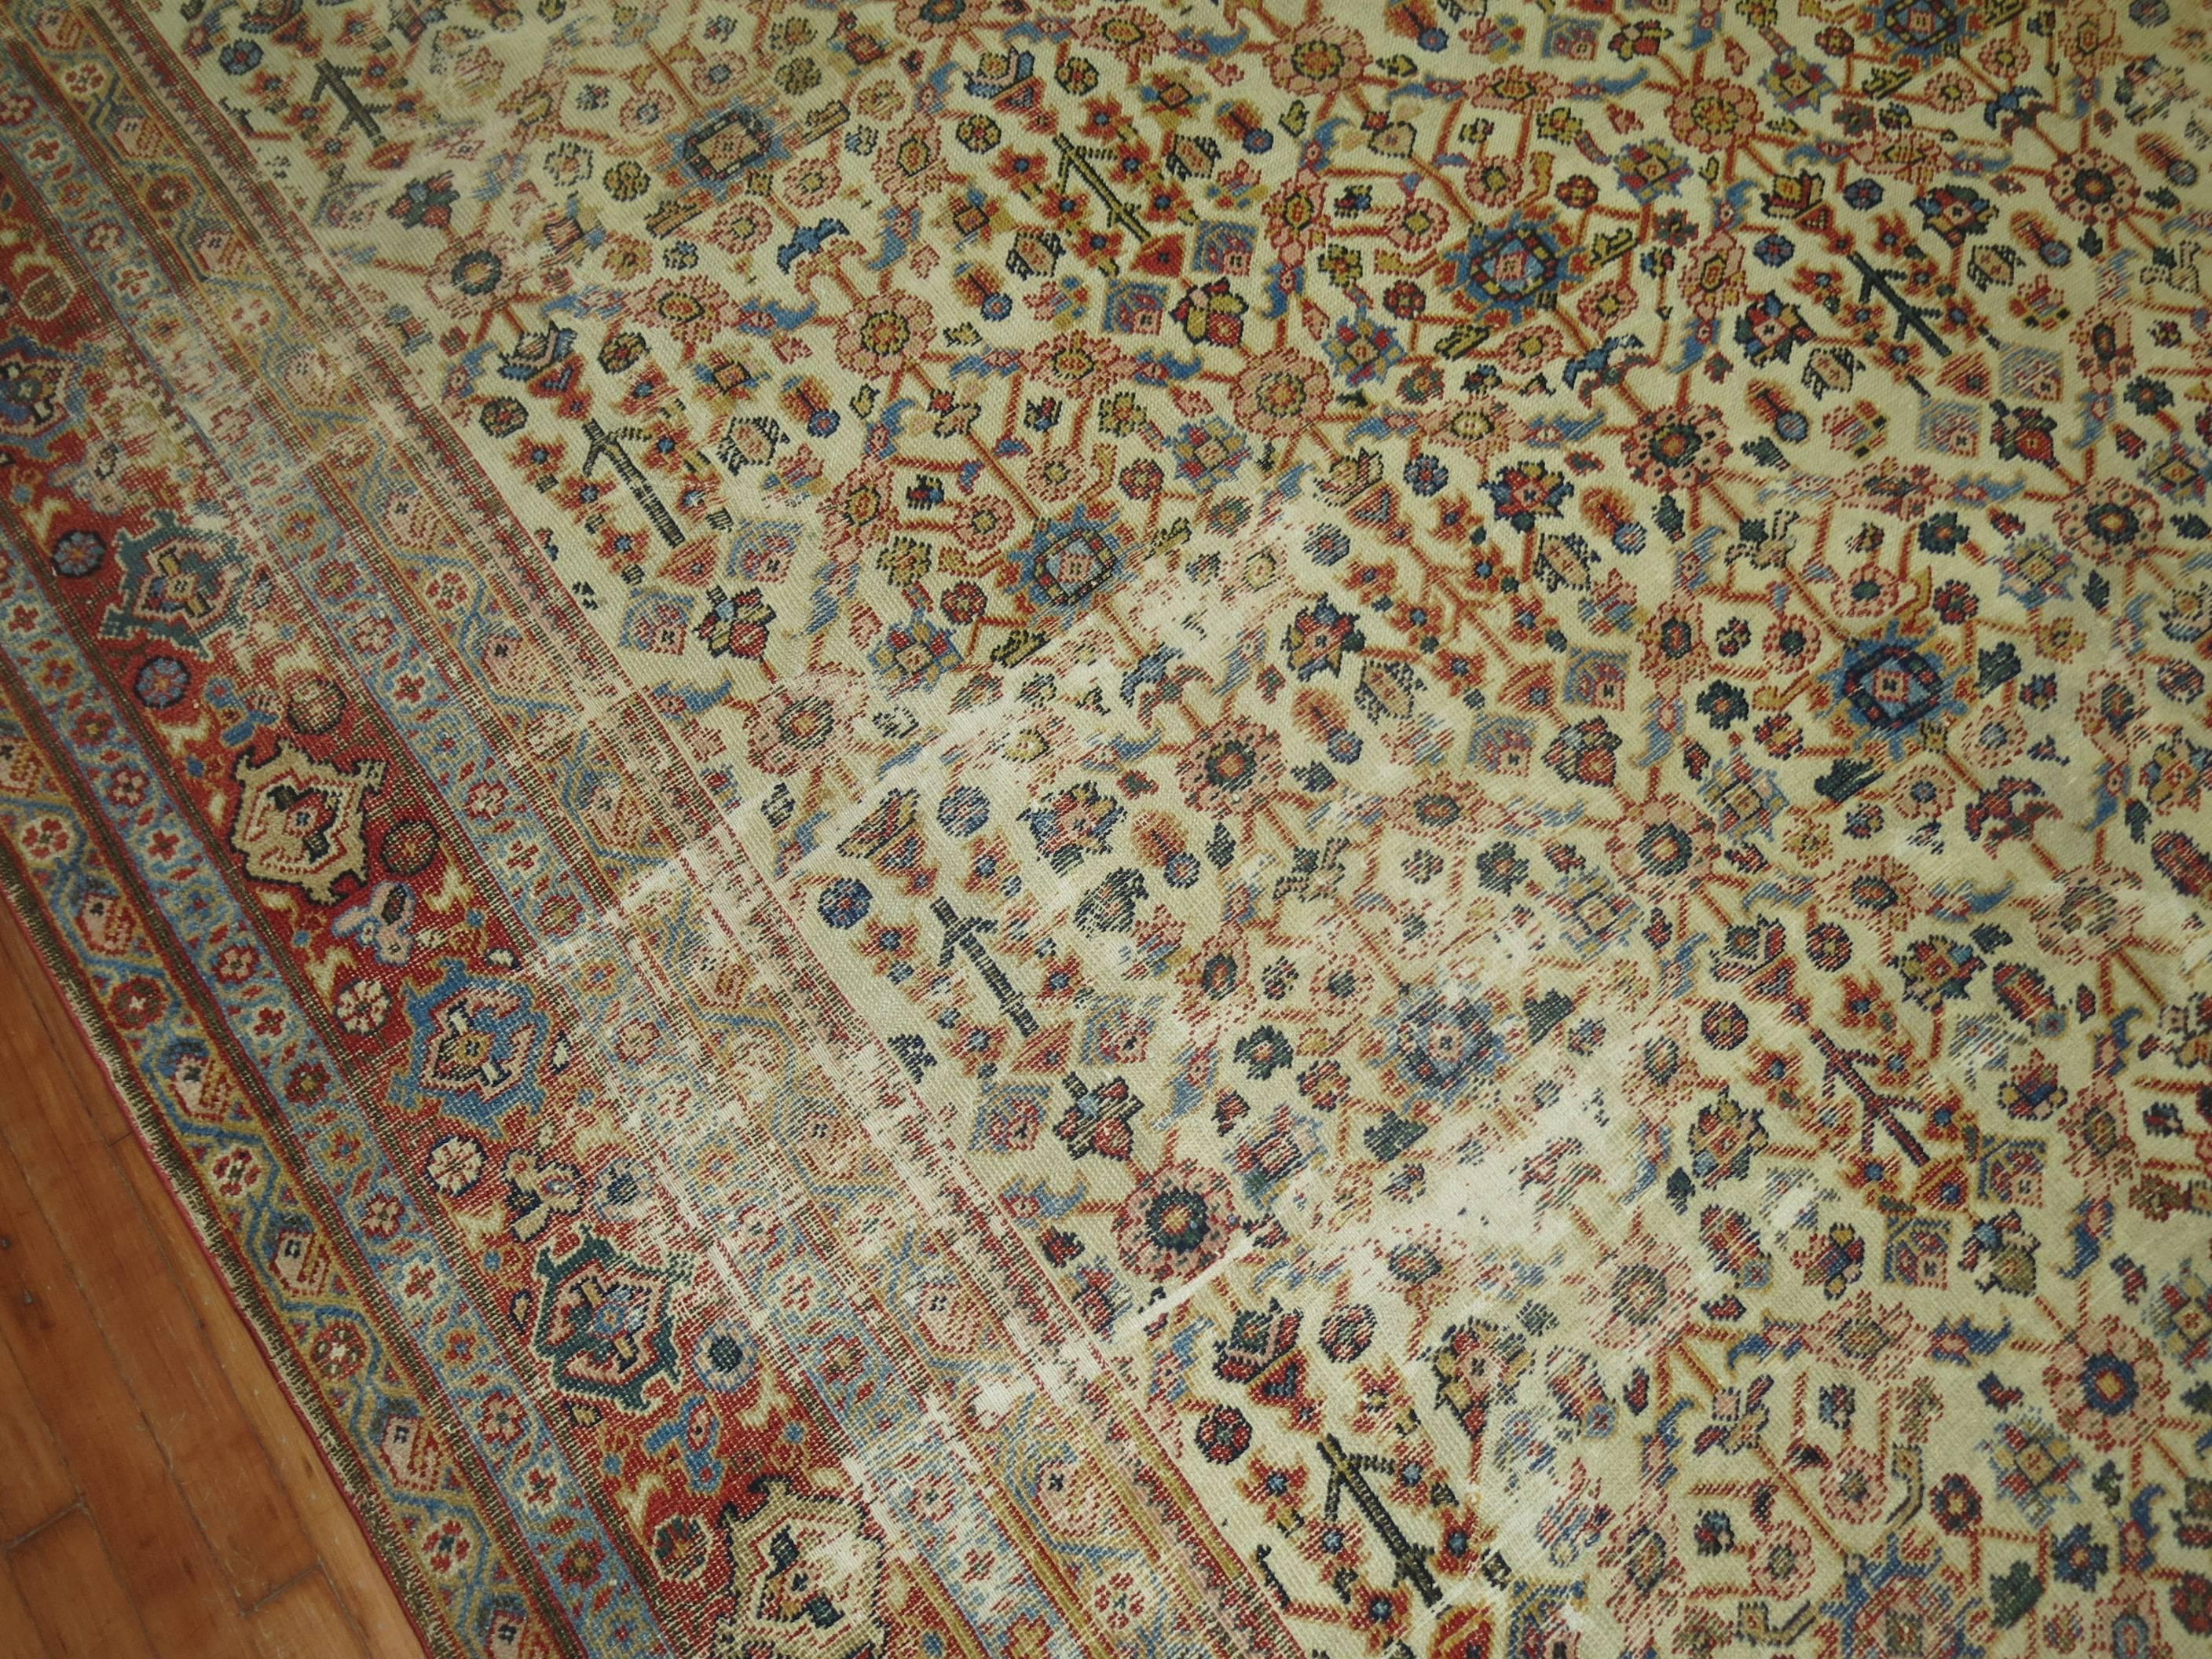 Worn Persian Room Size Oriental Early 20th Century Rug 4